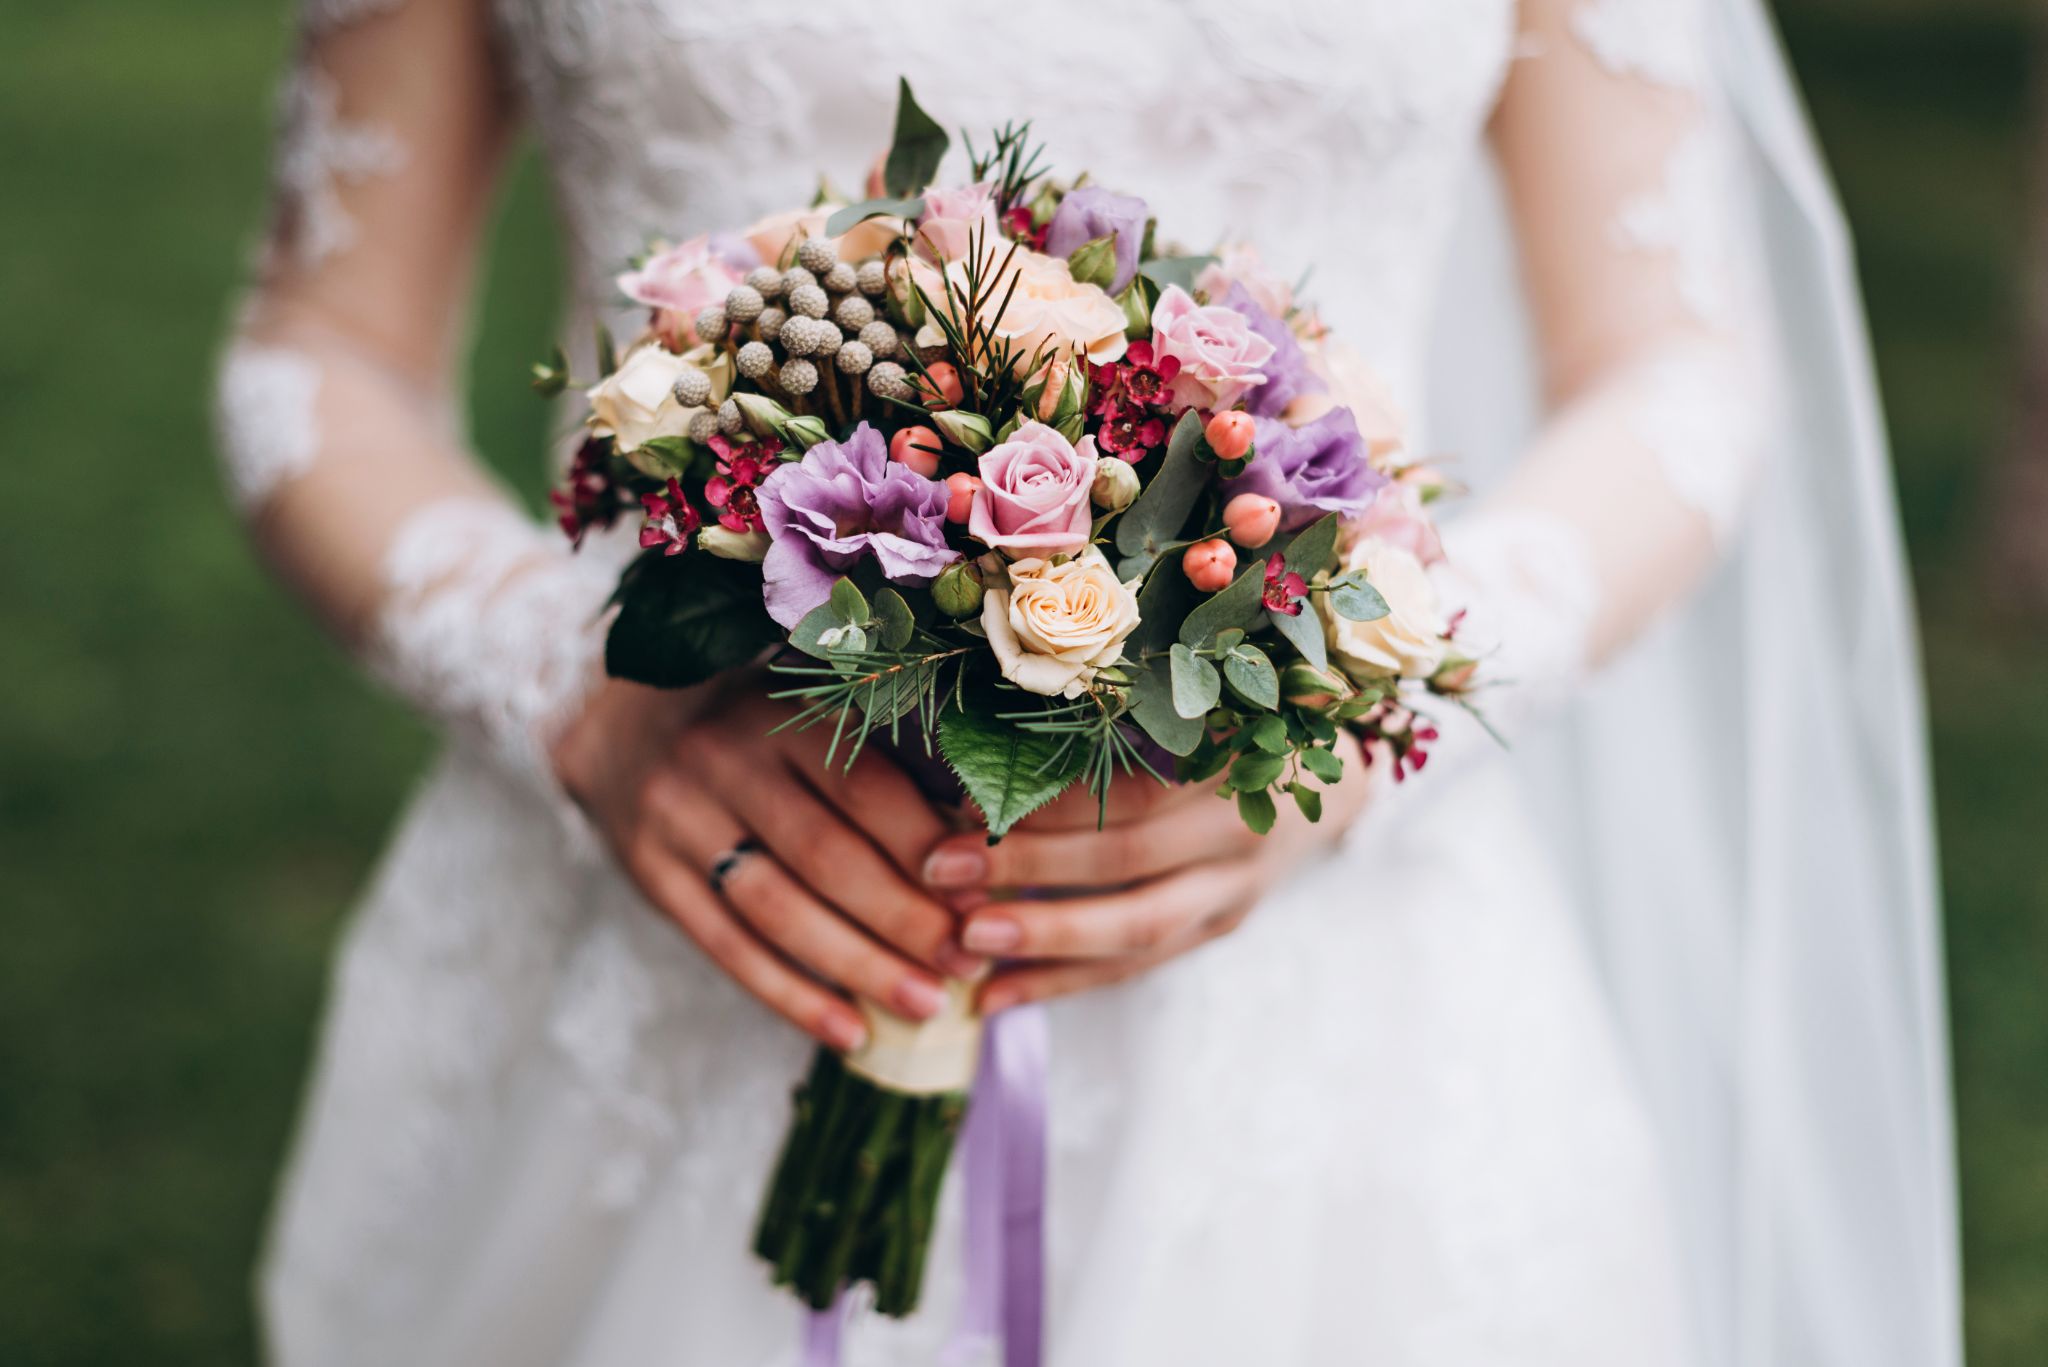 All You Need to Know About the Bridal Bouquet